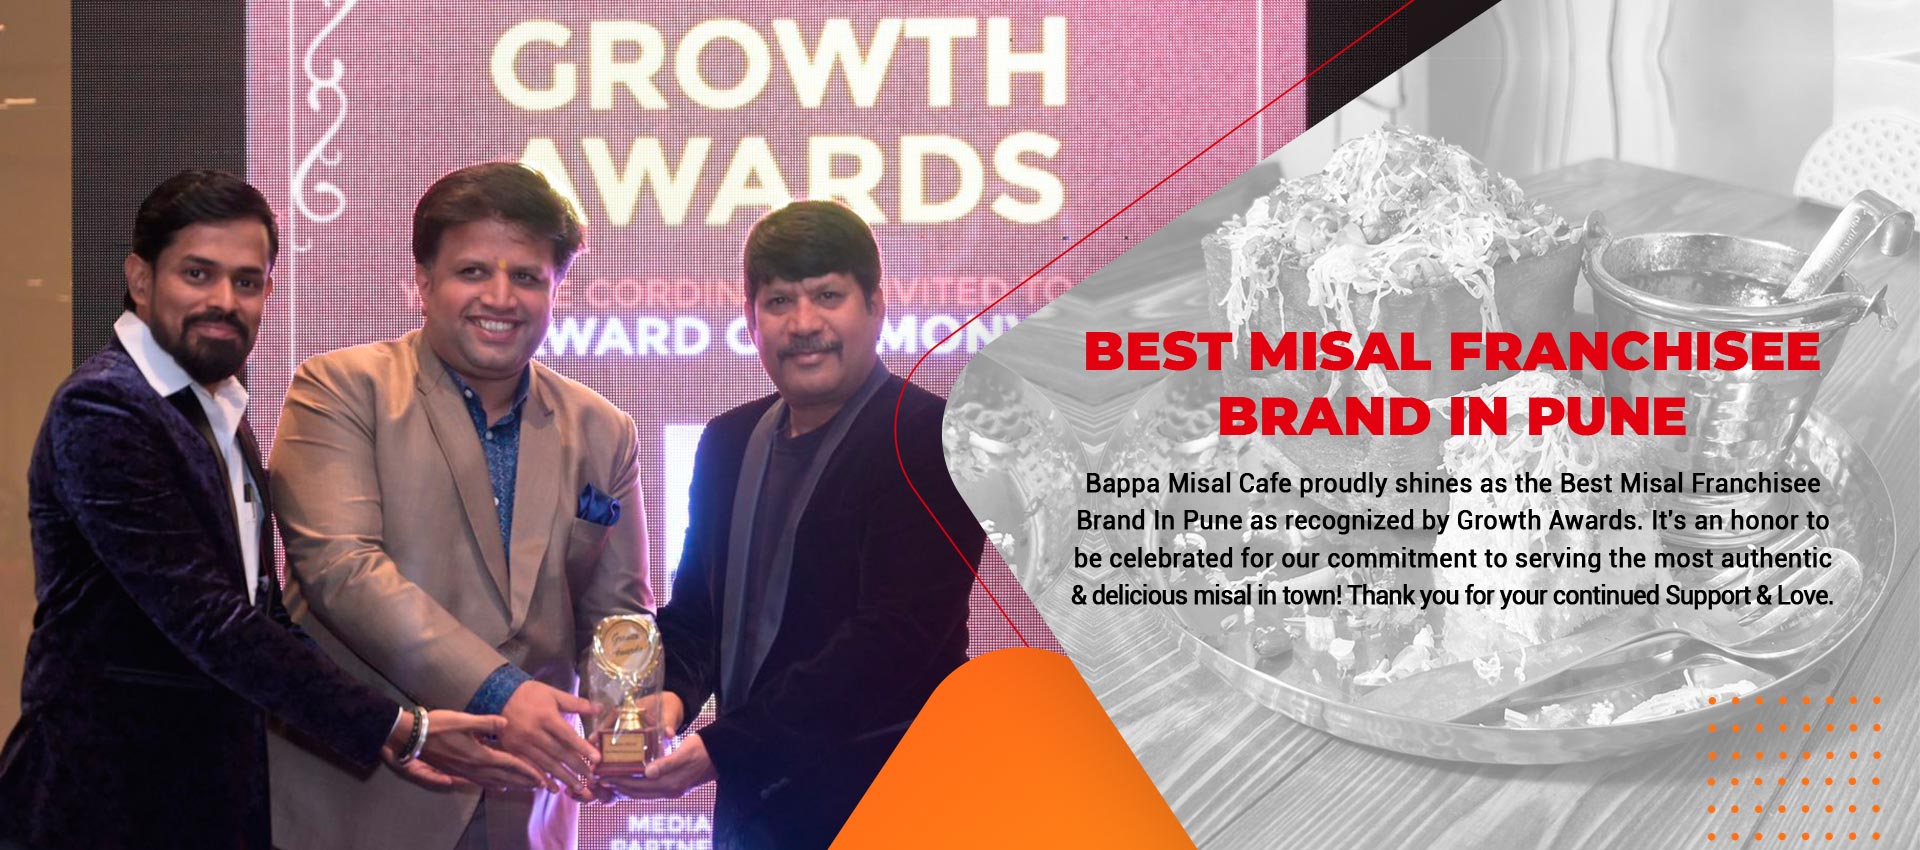 
Bappa Misal Cafe proudly shines as the 🏆 Best Misal Franchisee Brand In Pune🏆 as recognized by Growth Awards. It's an honor to be celebrated for our commitment to serving the most authentic and delicious misal in town! Thank you for your continued support and love.